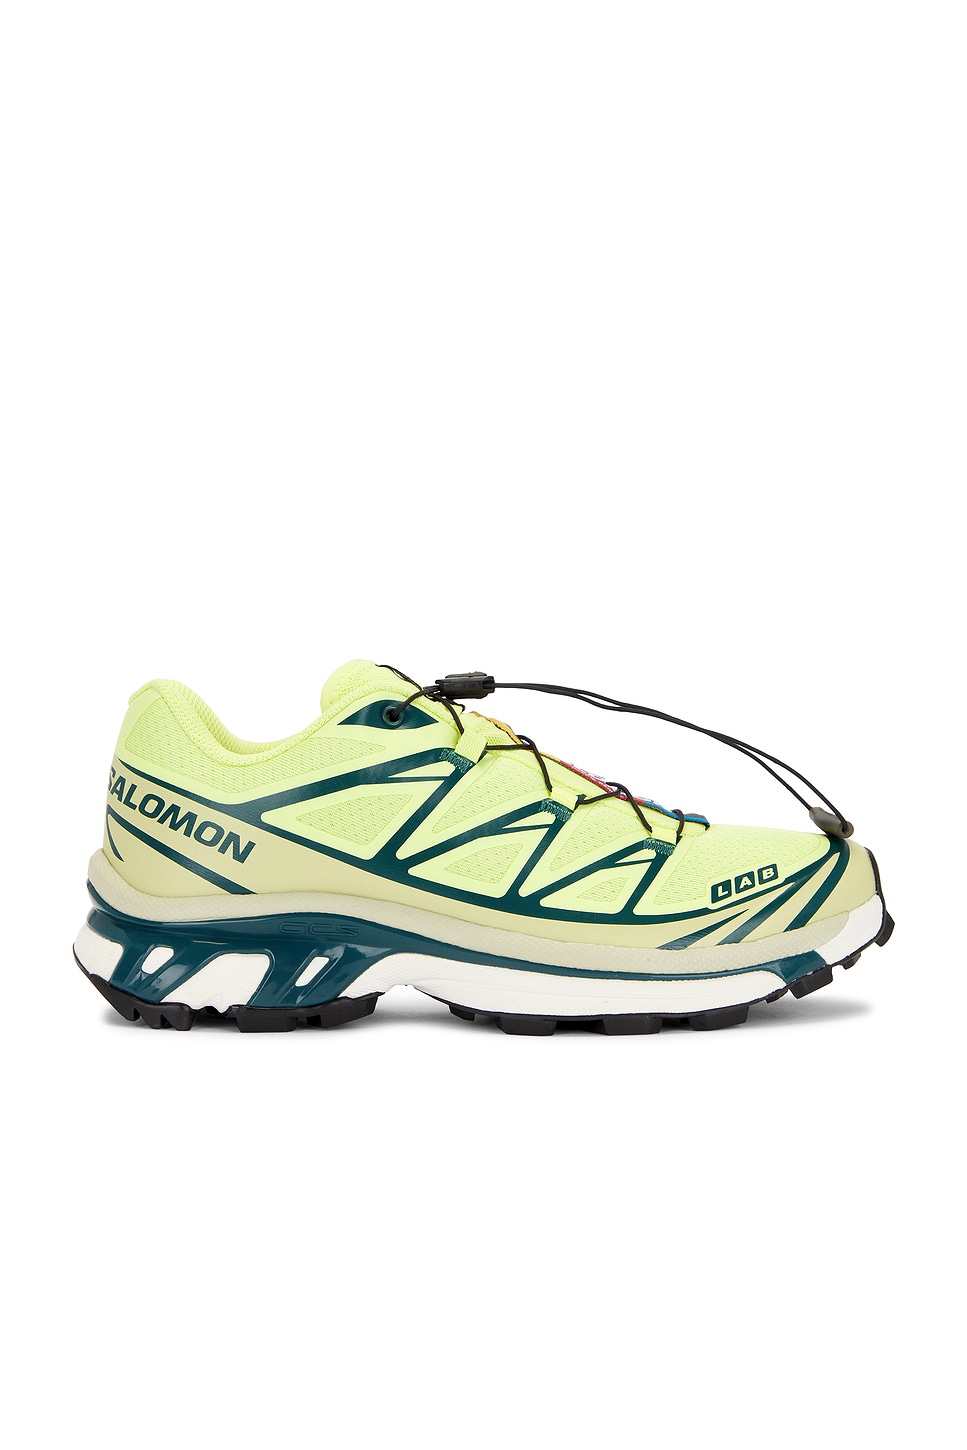 Image 1 of Salomon XT-6 Sneaker in Sunny Lime, Souther Moss, & Atlantic Deep